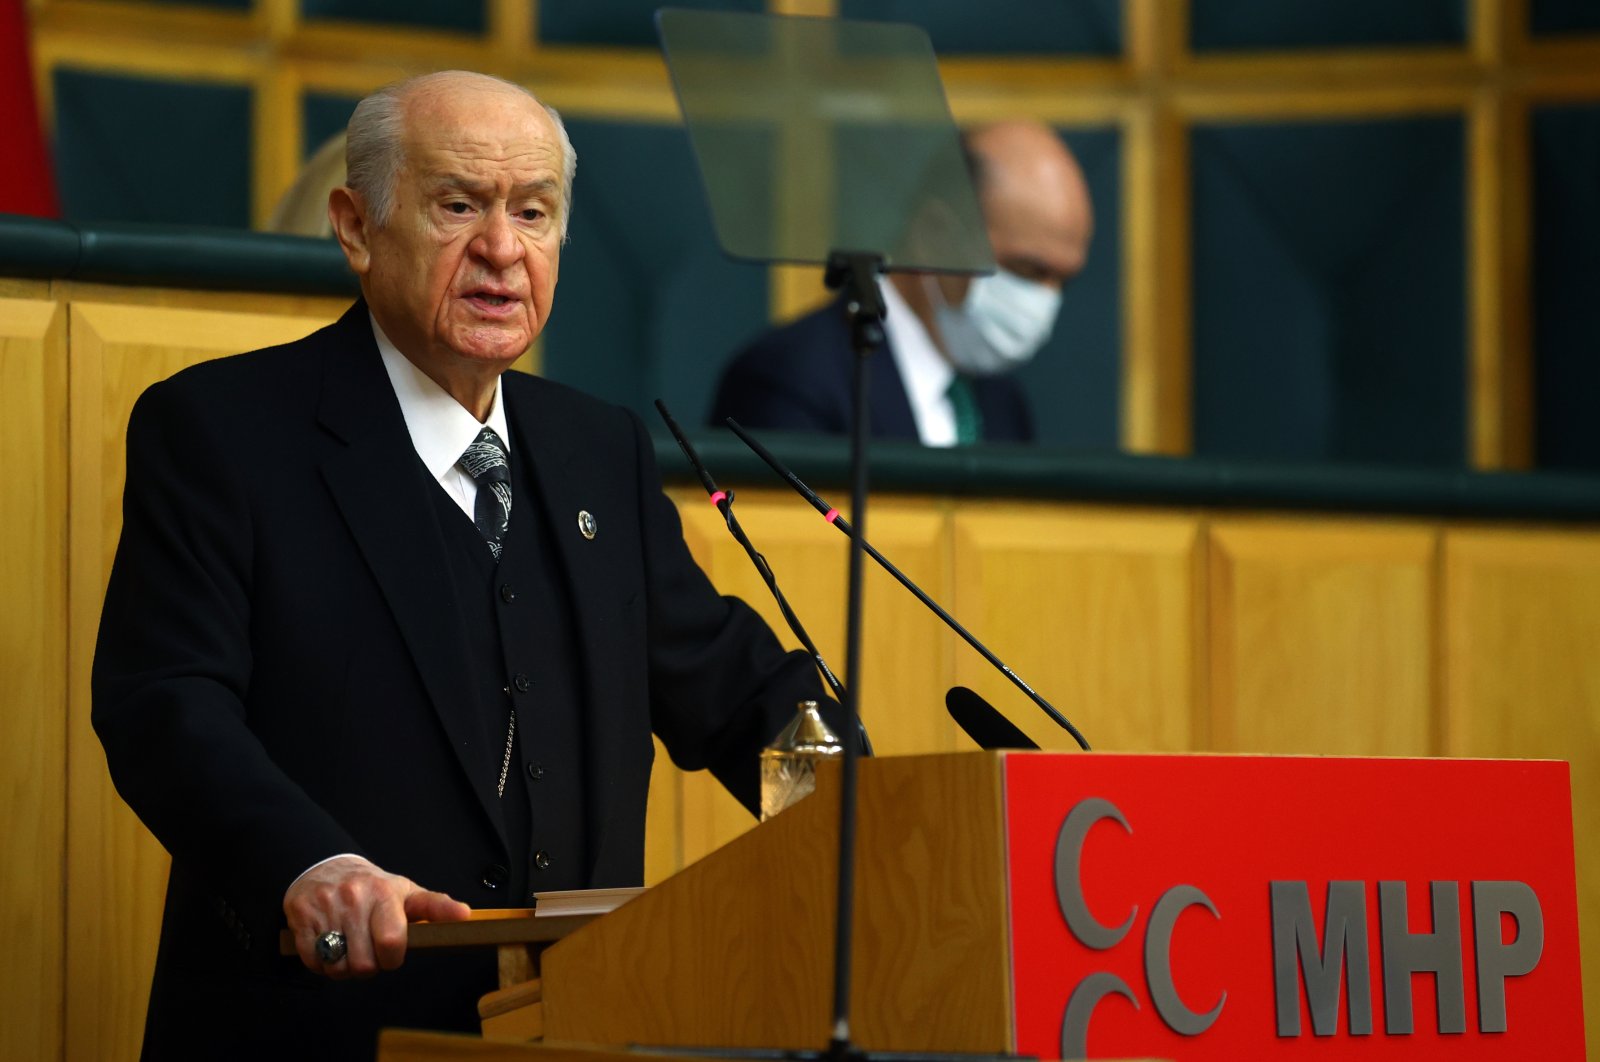 MHP Chairperson Devlet Bahçeli speaks at his party's parliamentary group meeting in the Turkish Parliament on Jan. 26, 2021. (AA Photo)